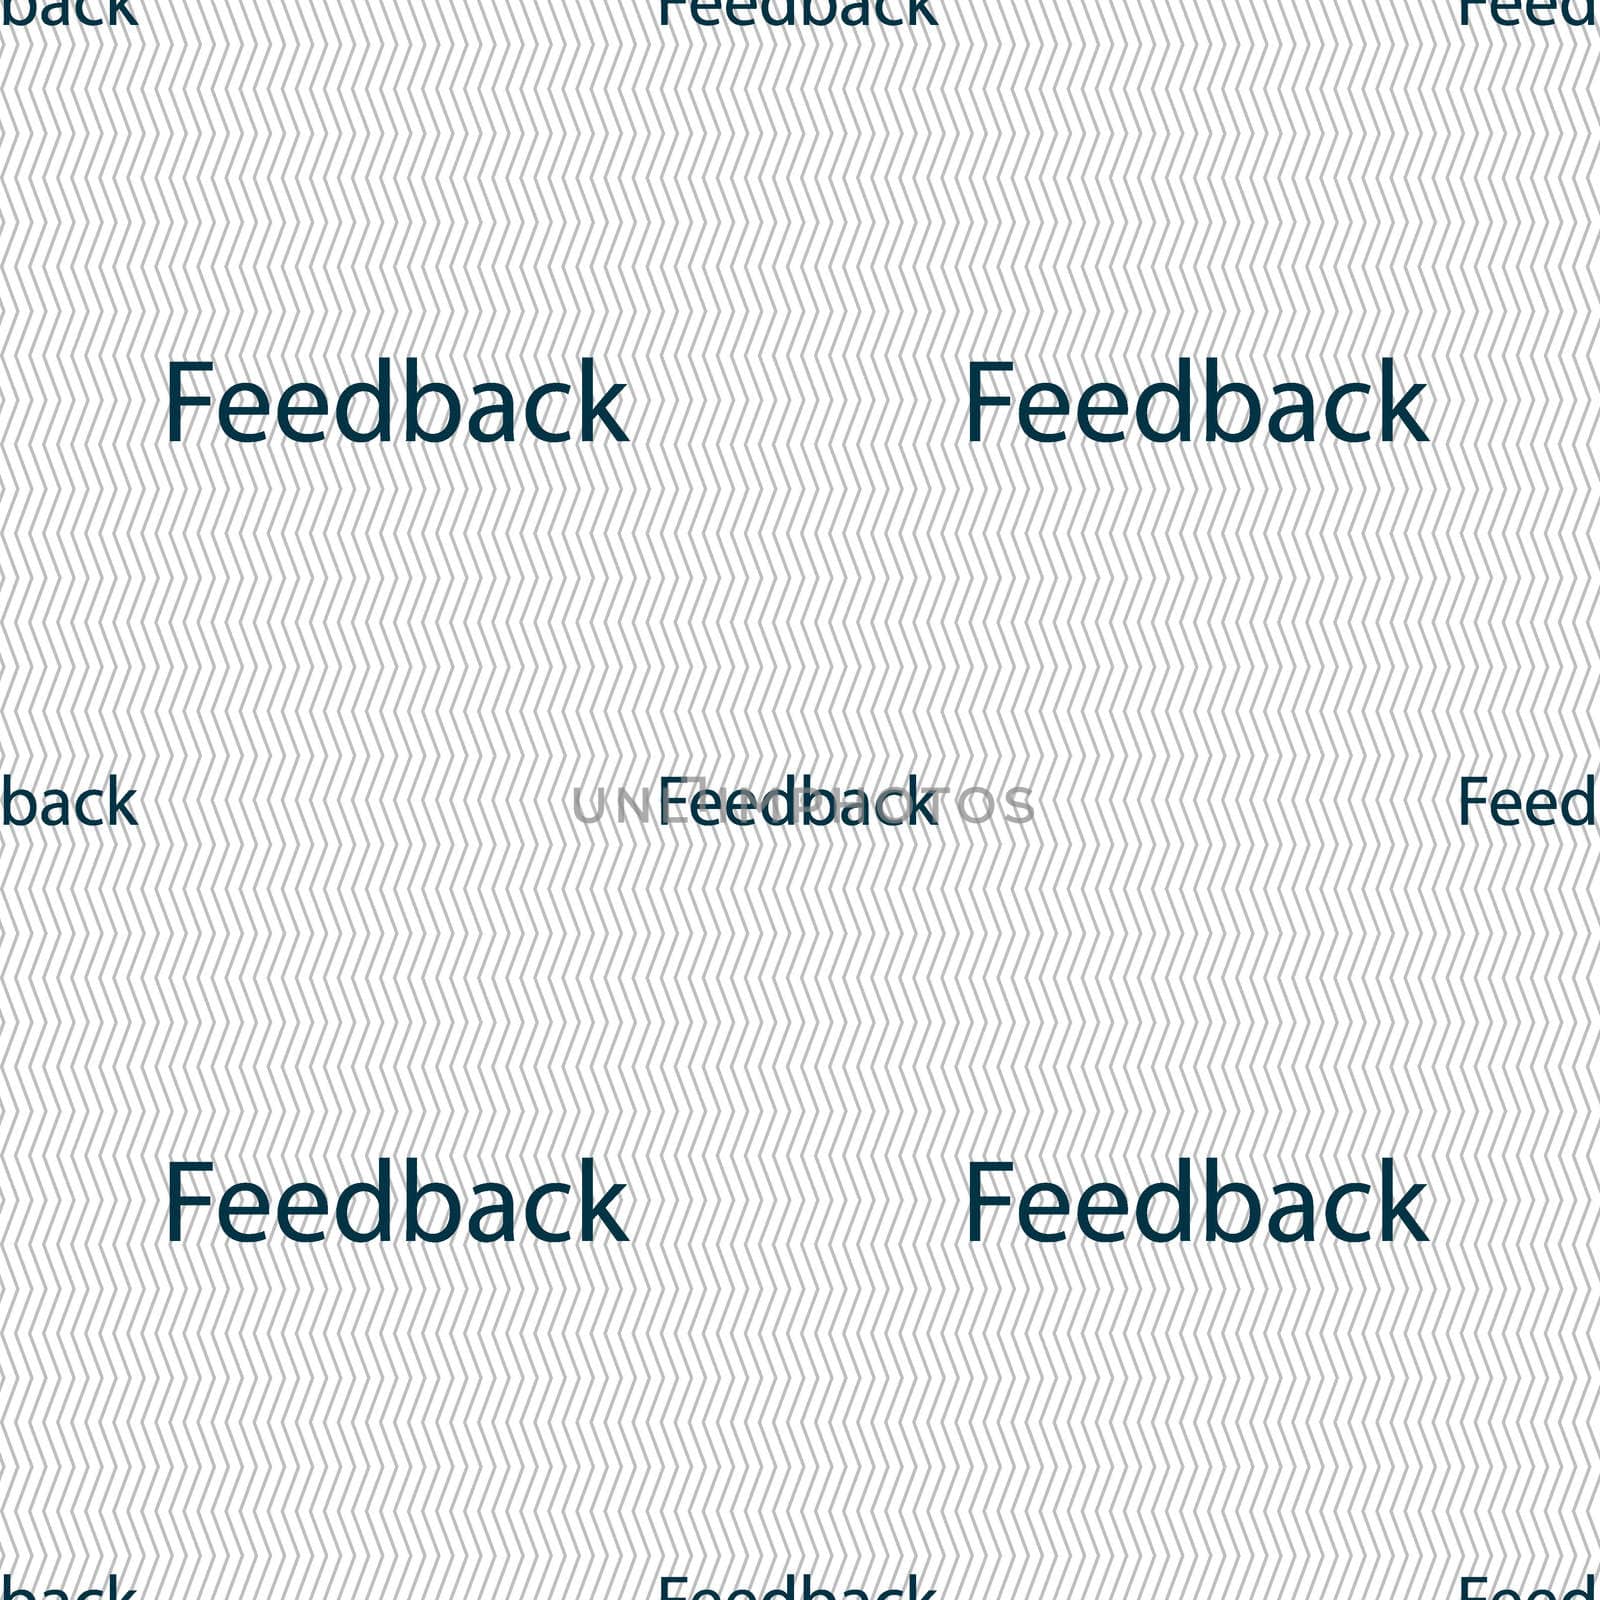 Feedback sign icon. Seamless abstract background with geometric shapes. illustration